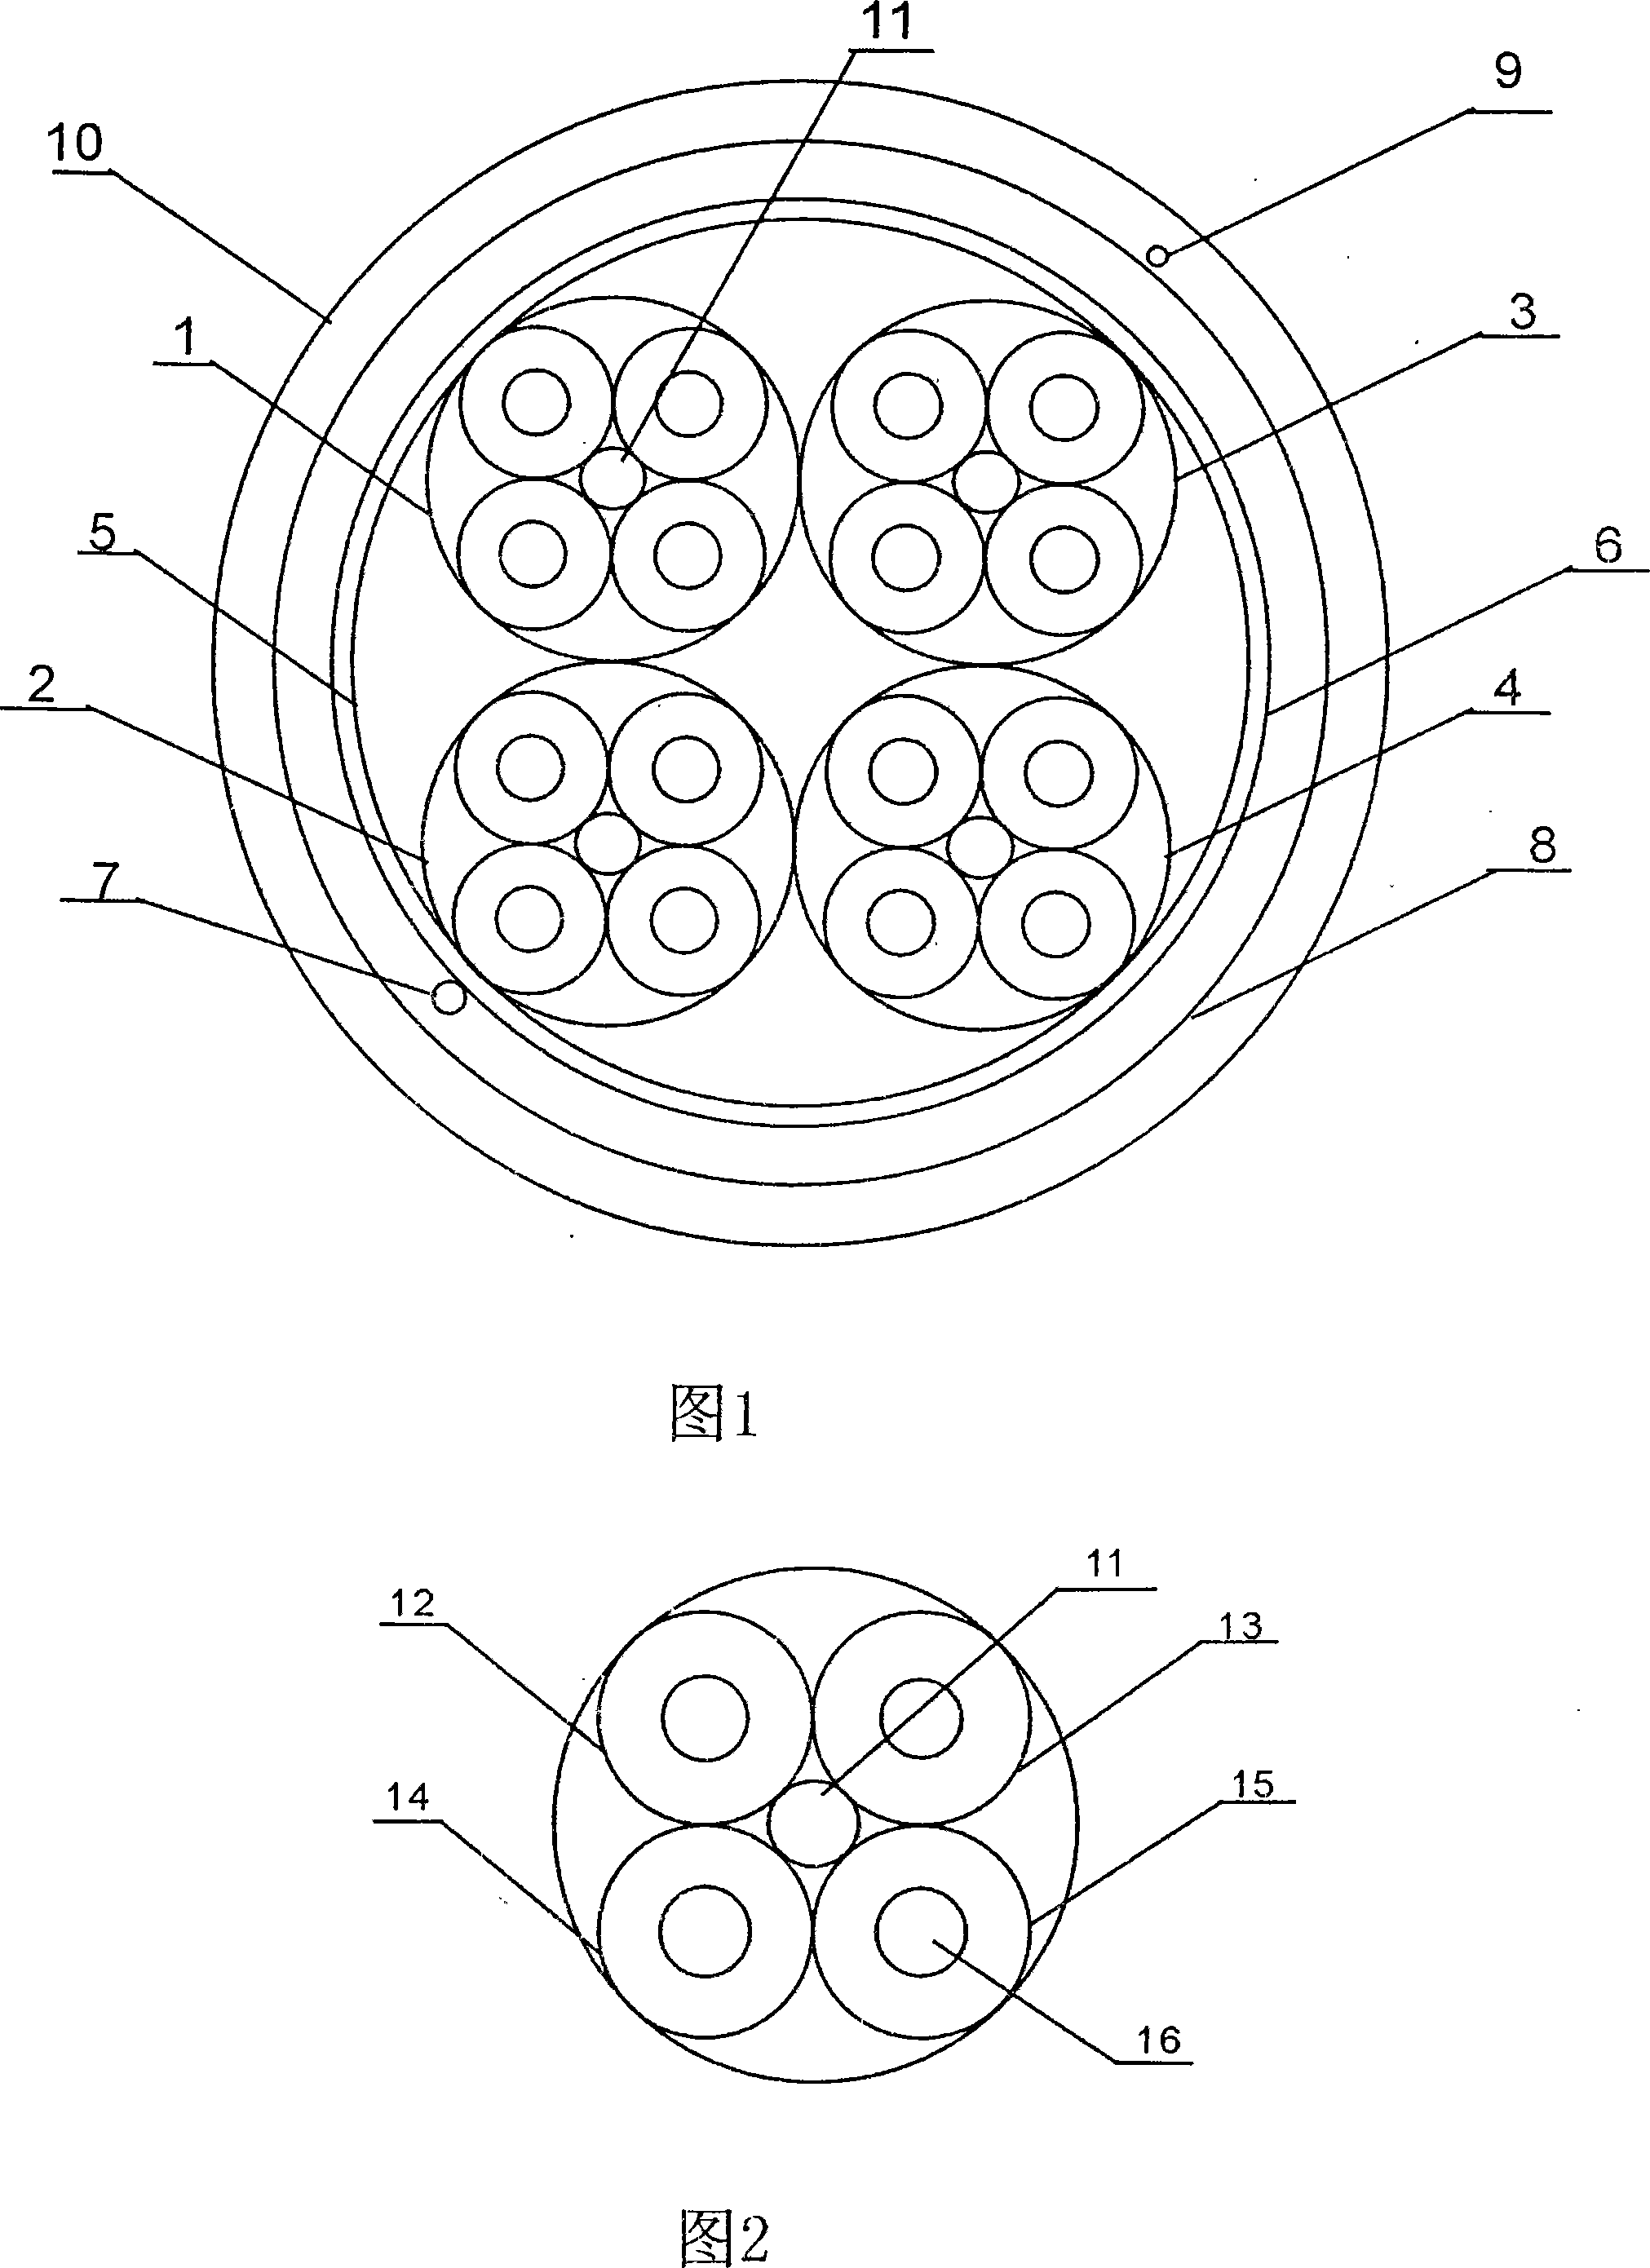 Symmetrical type transmission cable for digital simulation signal handling equipment